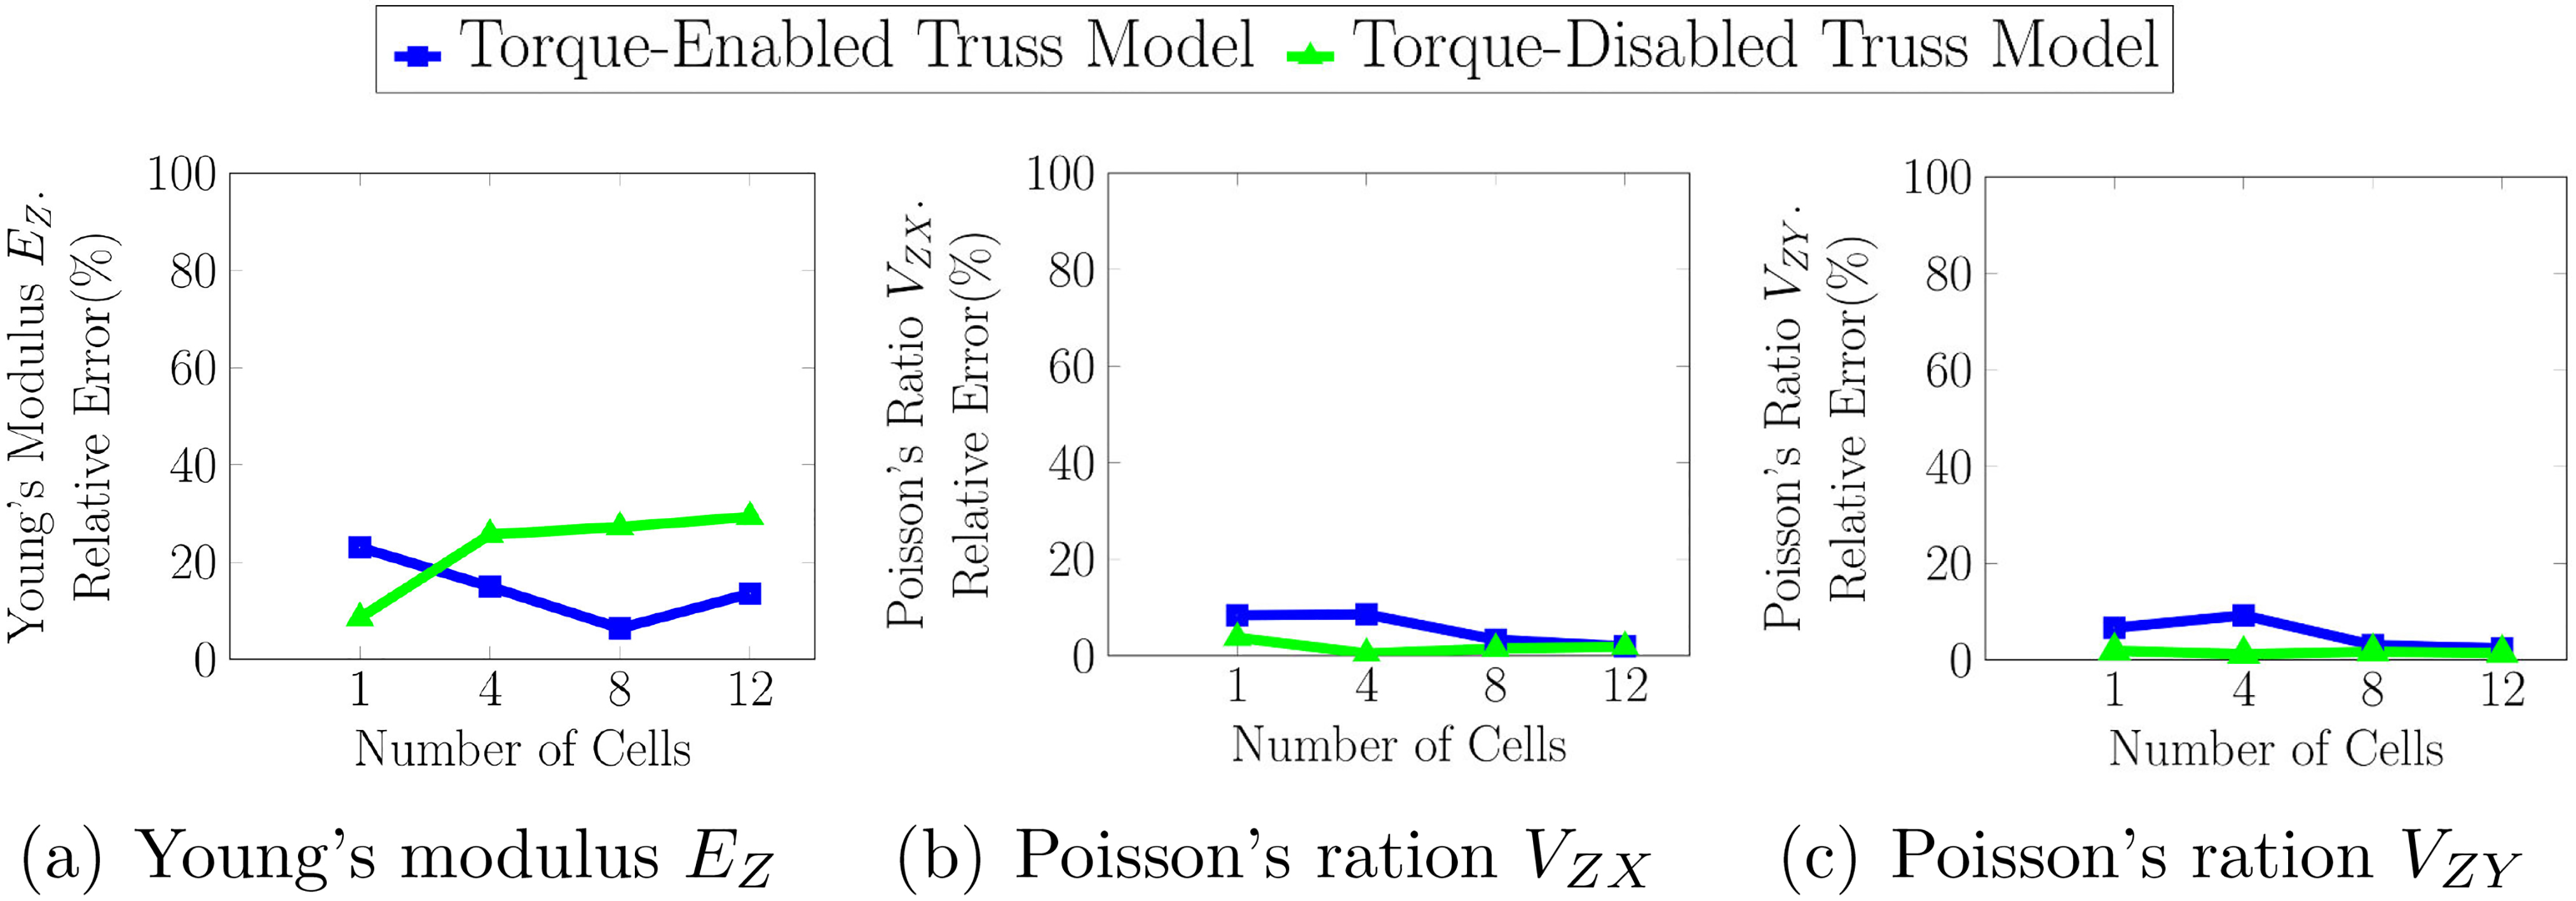 Relative error in the estimation of the Young’s modulus and Poisson’s ratio for the (a) Torque-enabled Truss model and (b) Torque-disabled Truss model. The BREP model is considered as ground truth.